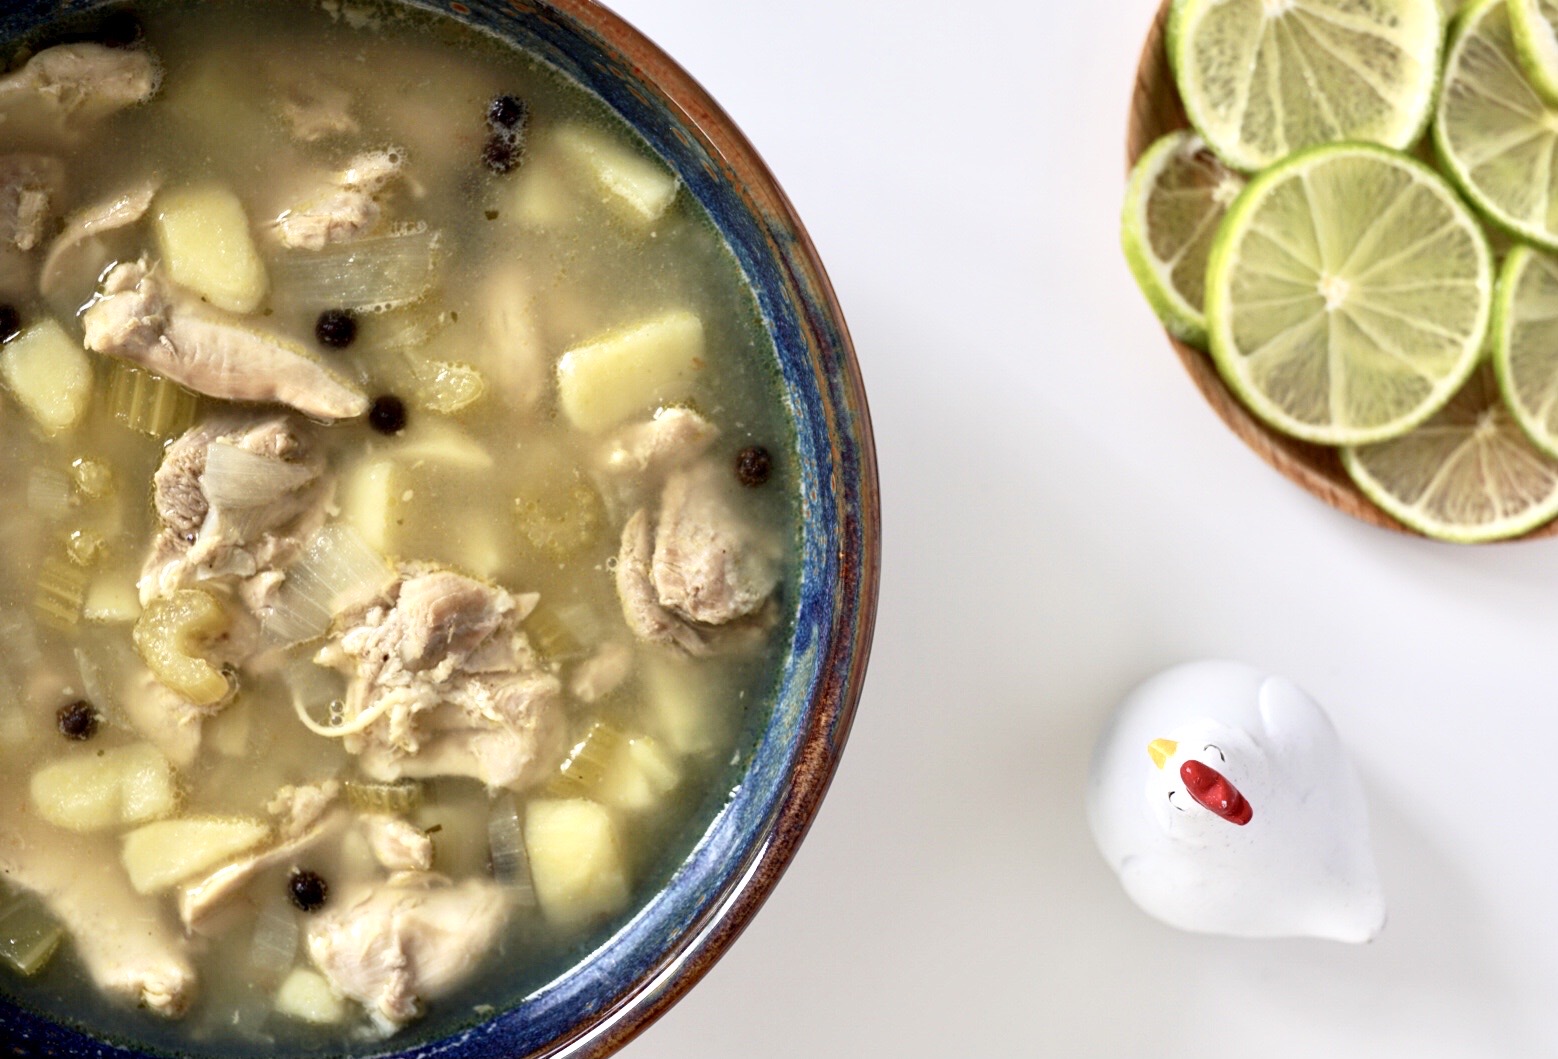 Bahamian Chicken Souse